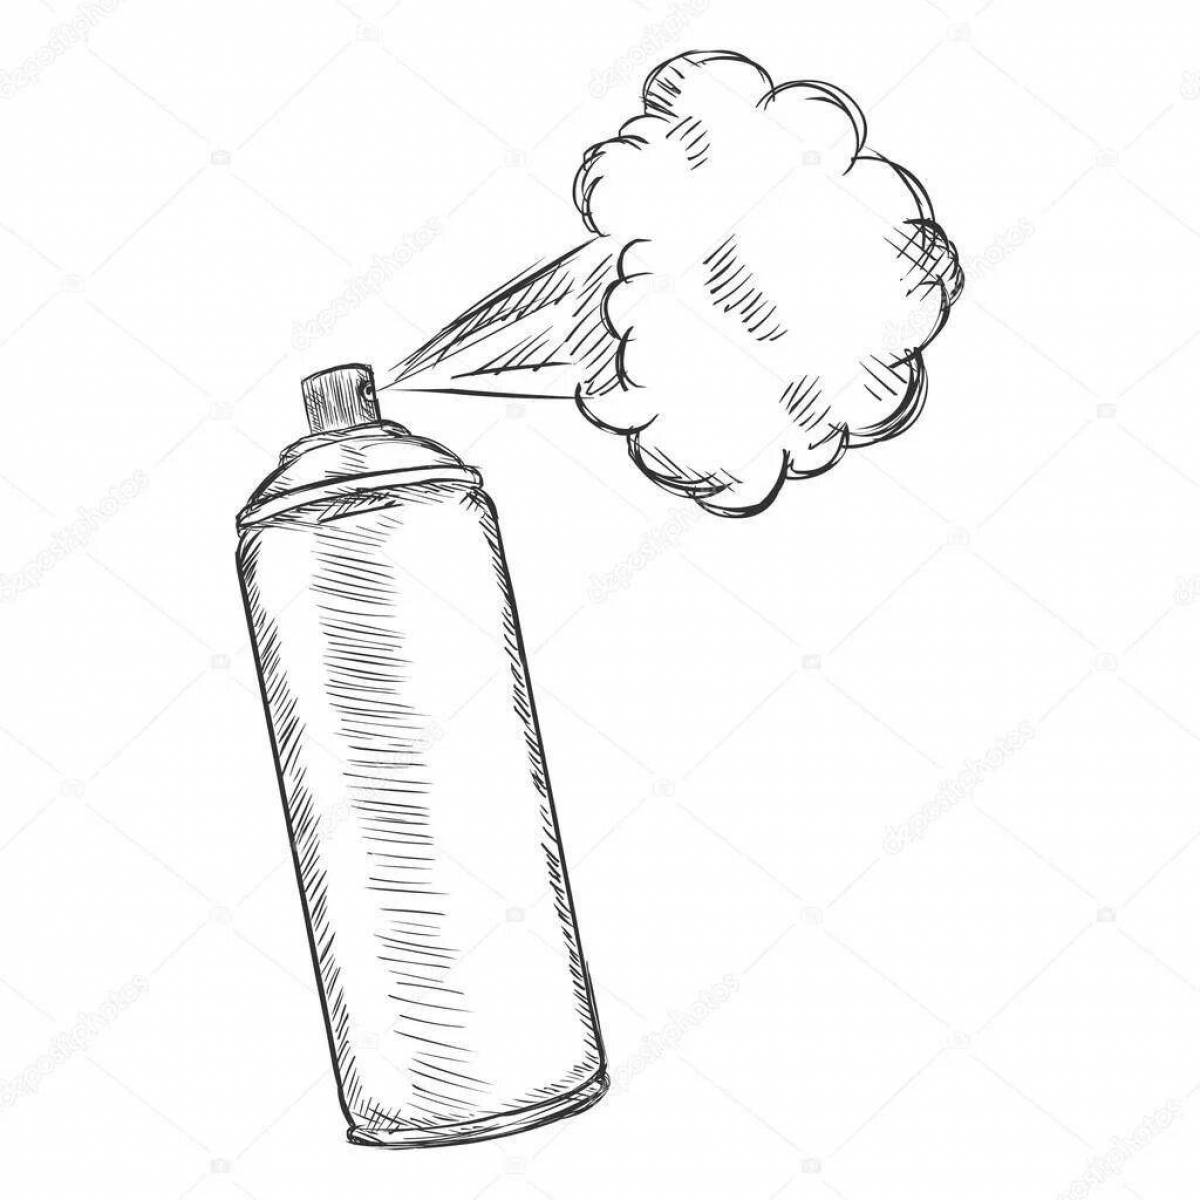 Coloring page stylish gas cylinders